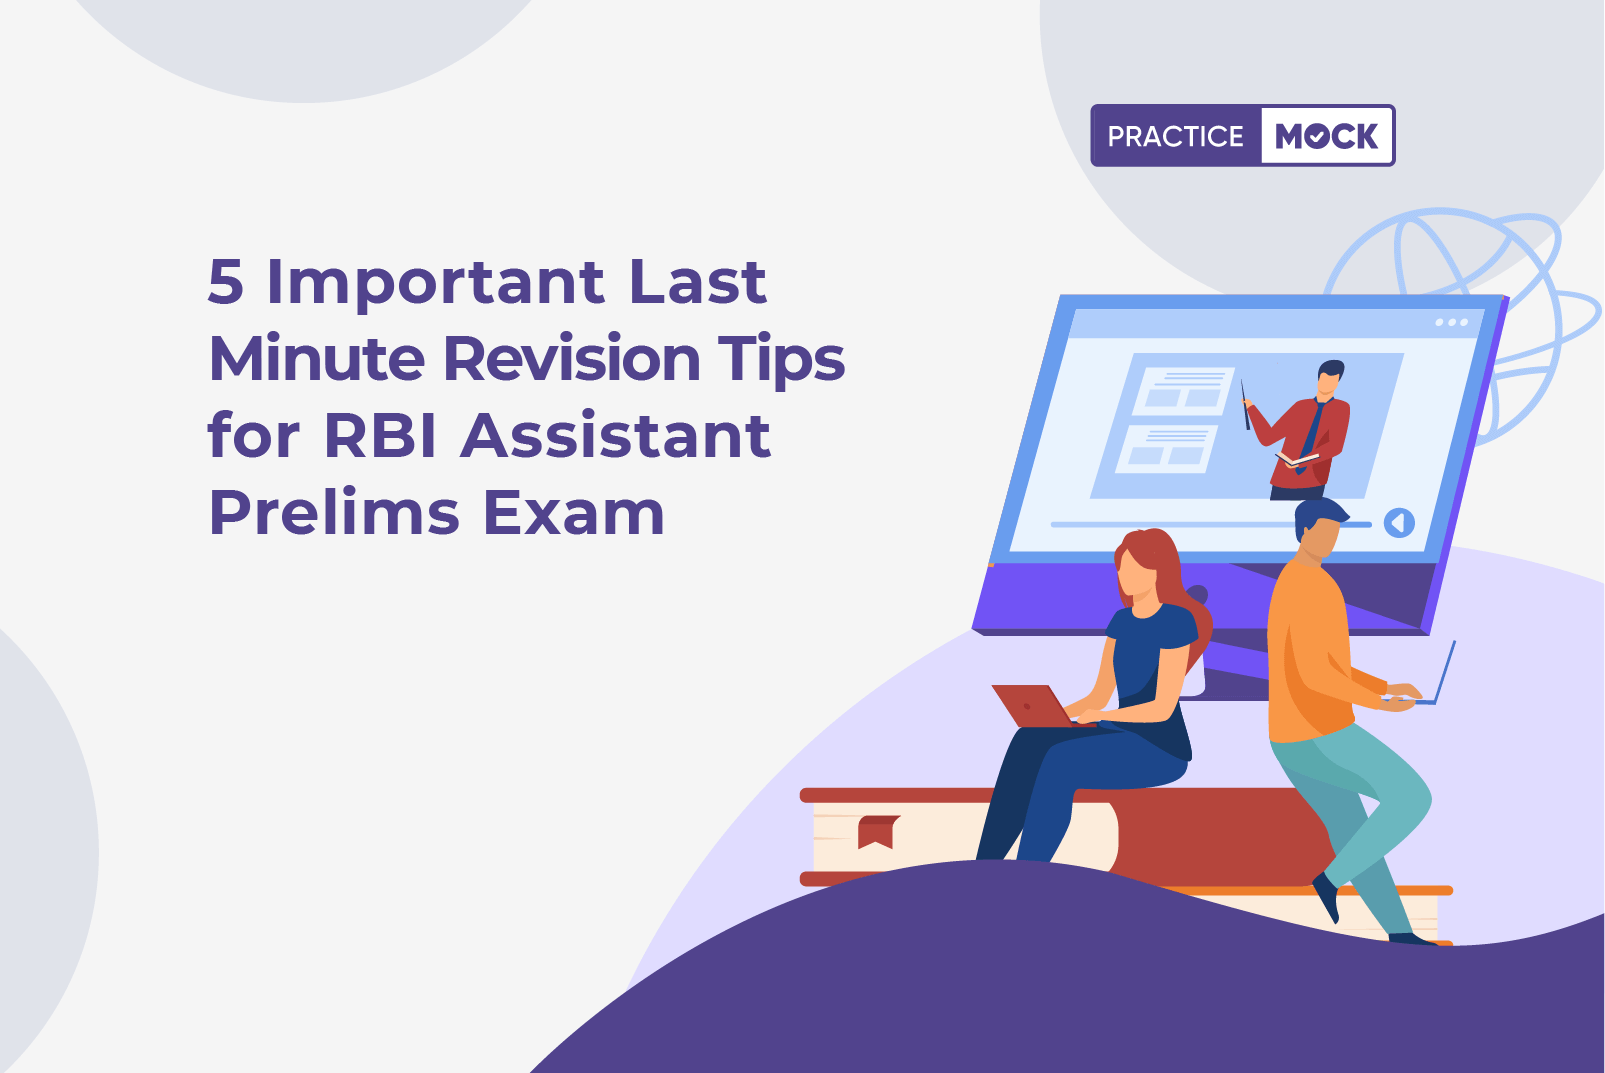 RBI Assistant Revision Tips